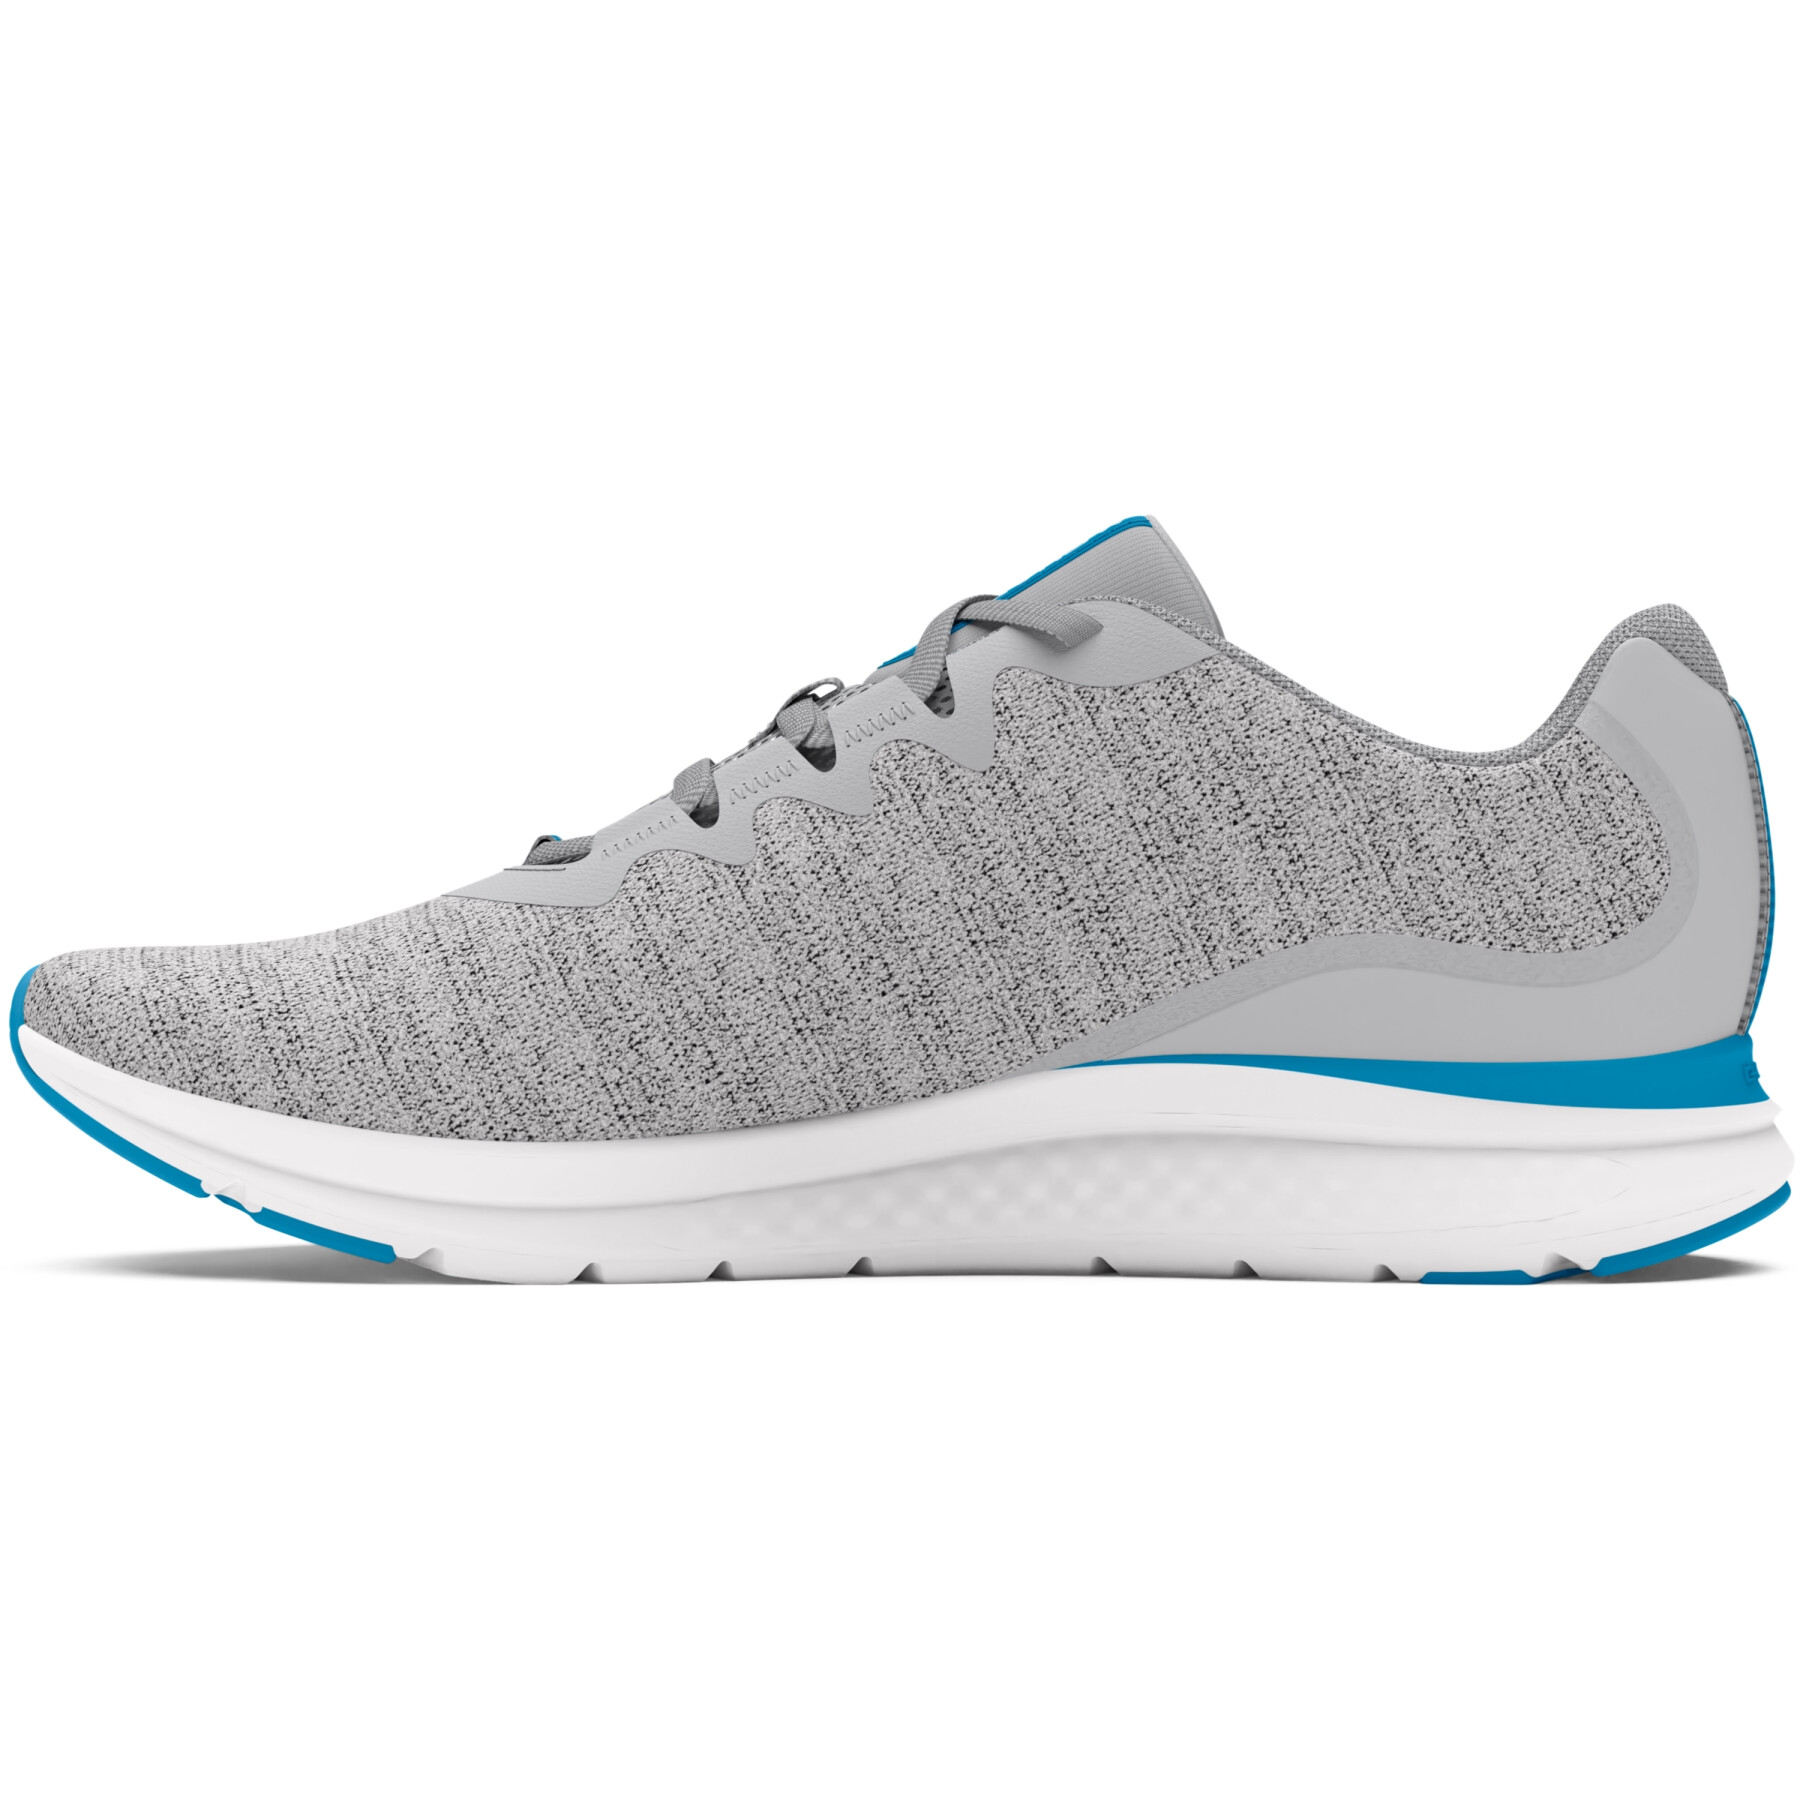 Running shoes Under Armour Charged Impulse 3 Knit